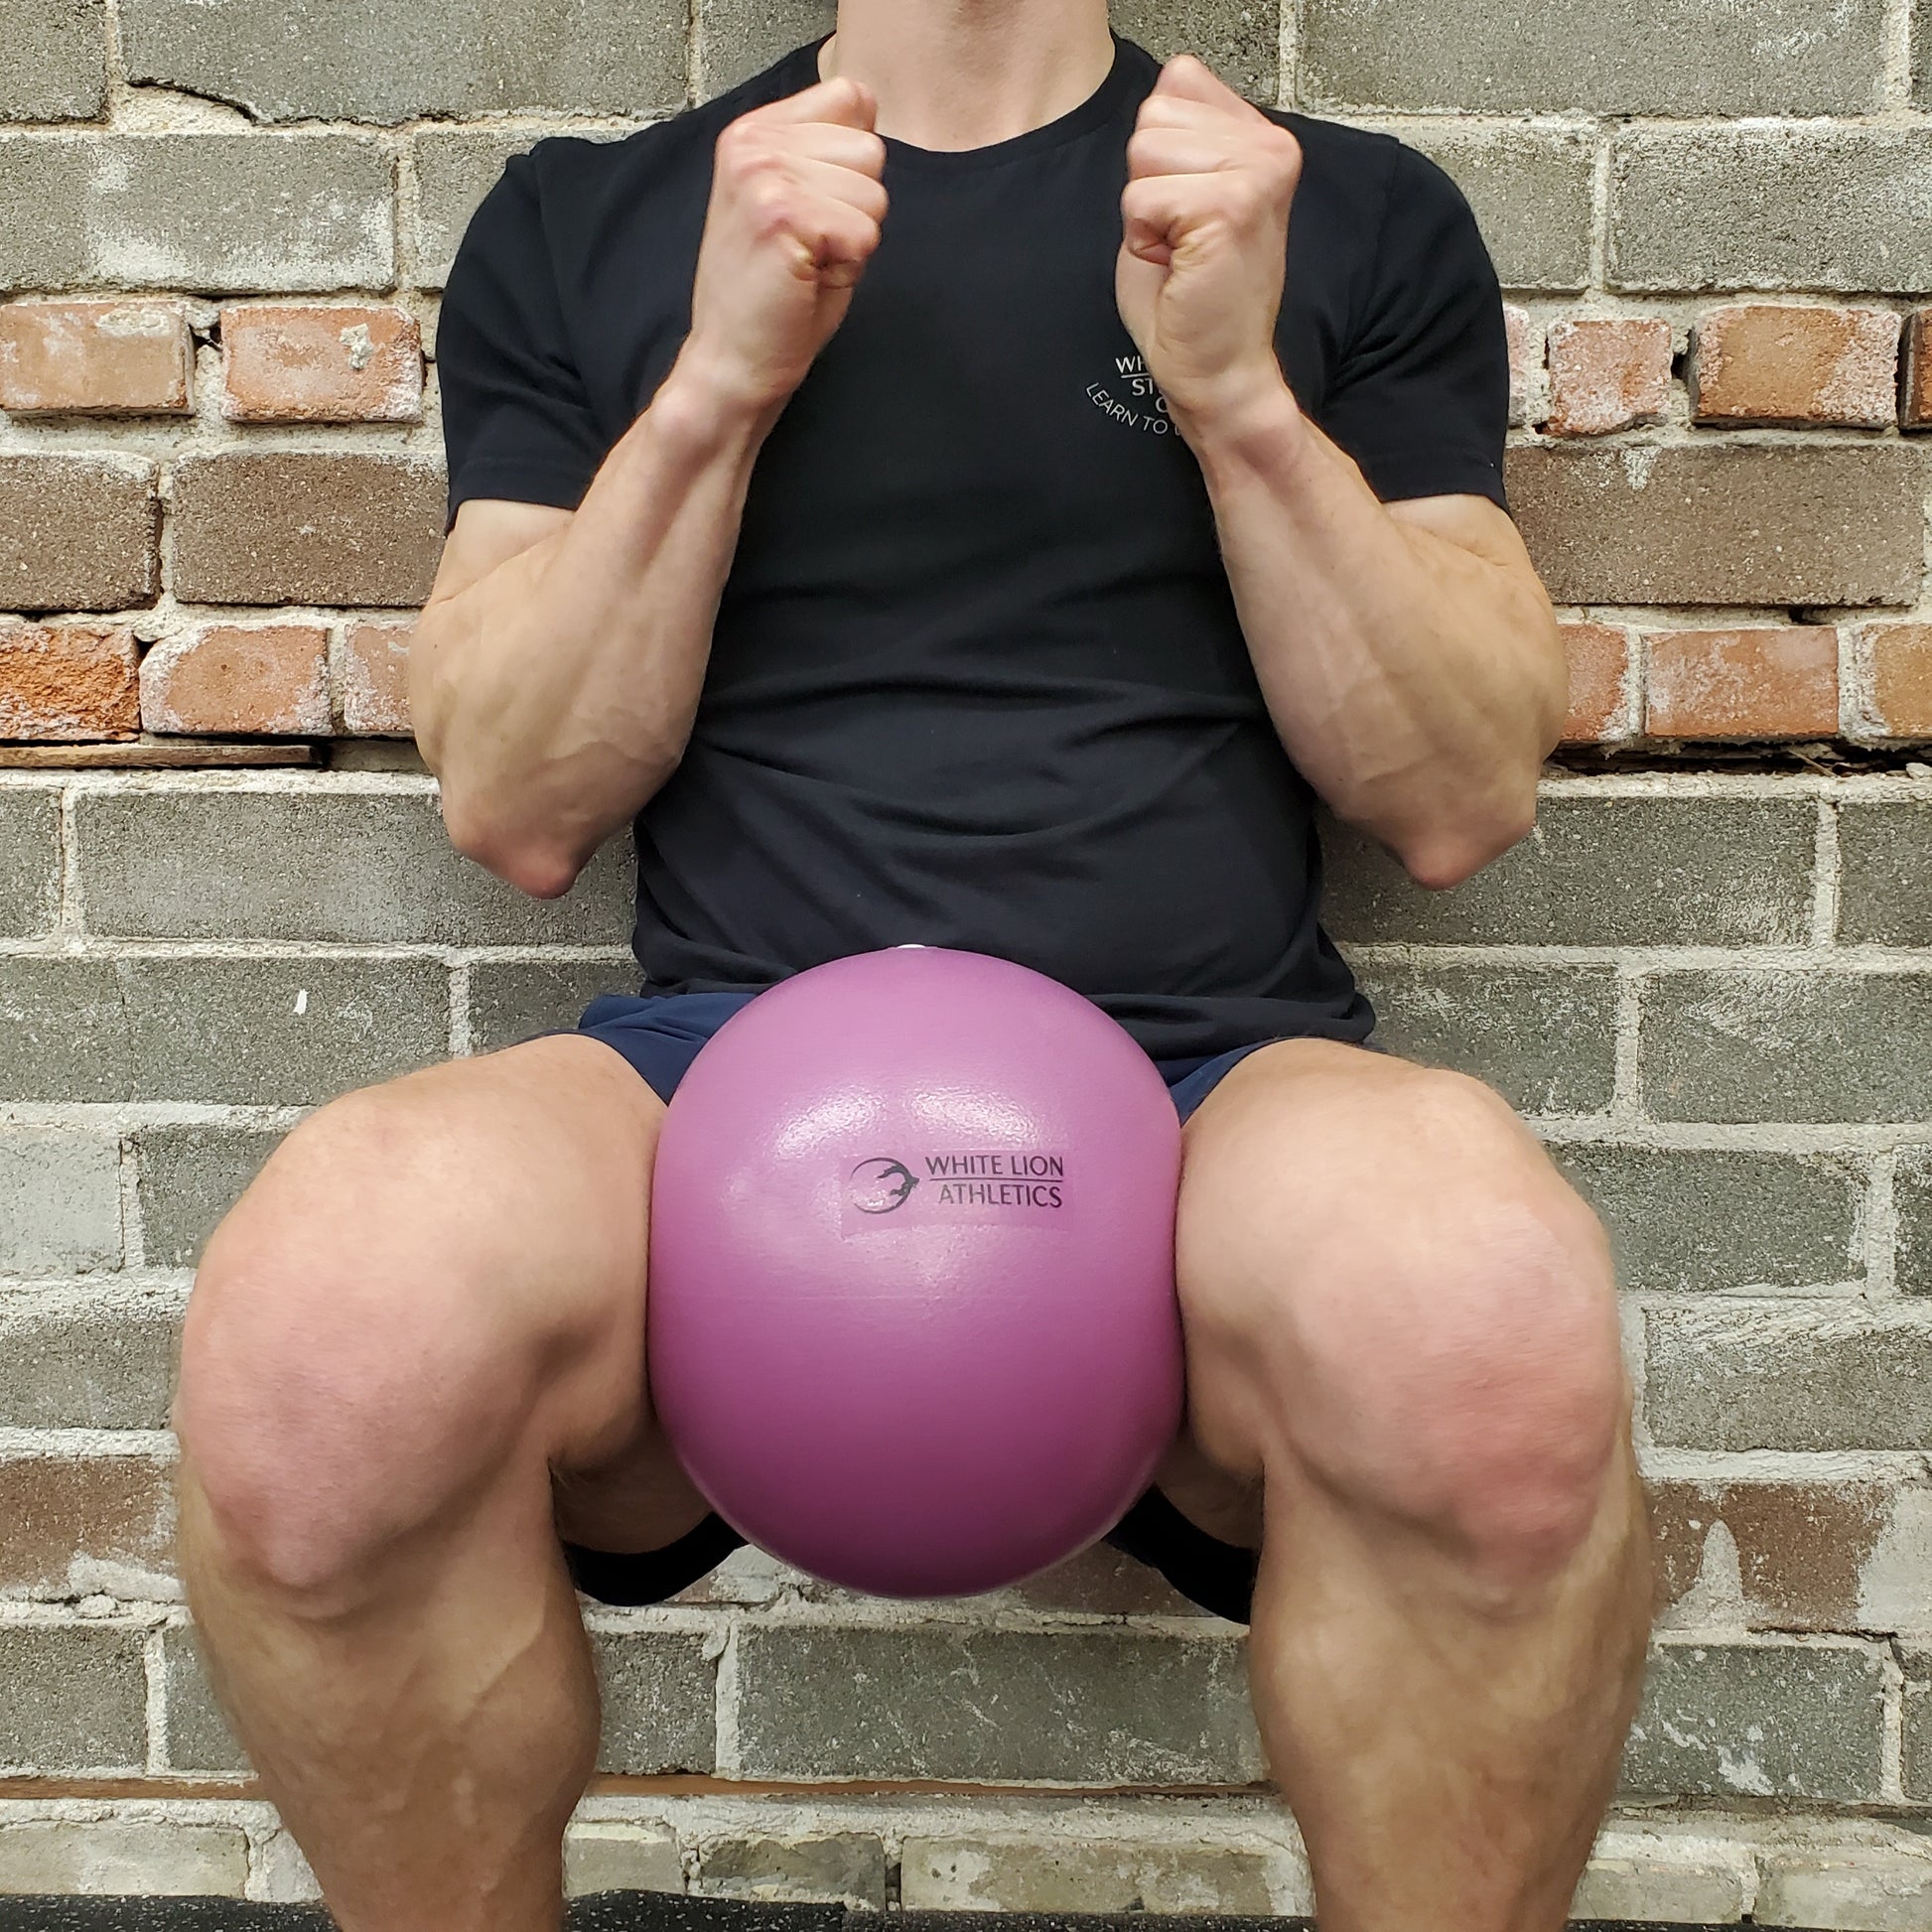 Best pilates ball exercise. Wall sit with hip adduction